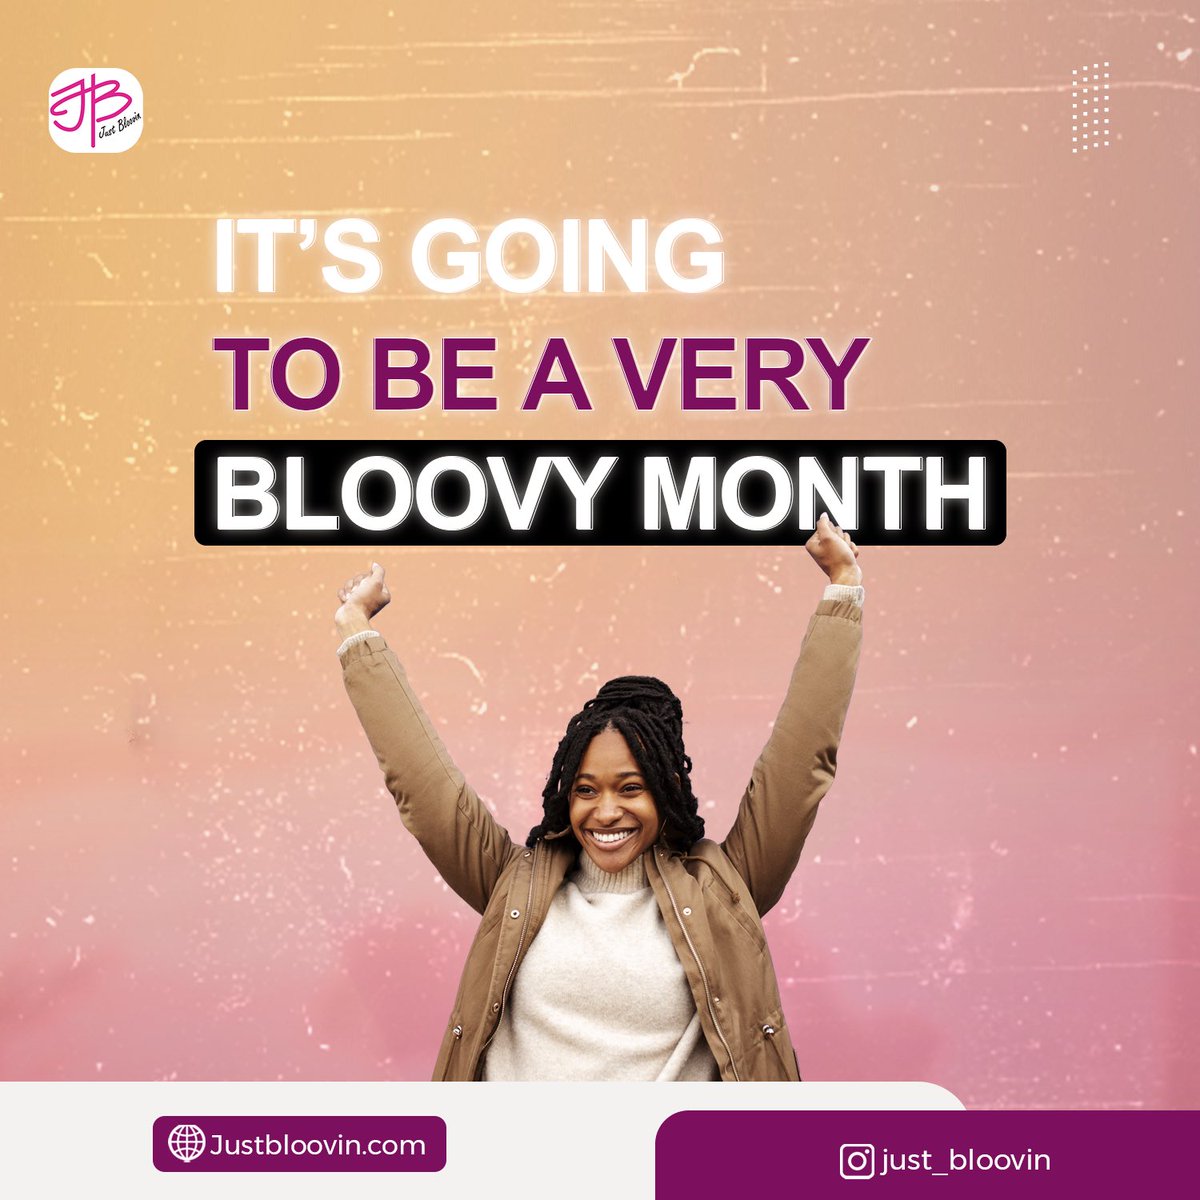 Start the month with some music and fun. Let's make this month unforgettable 💫

#justblooovin #ibloov #PartyVibes #GrooveWithUs #JulyFun #newmonth